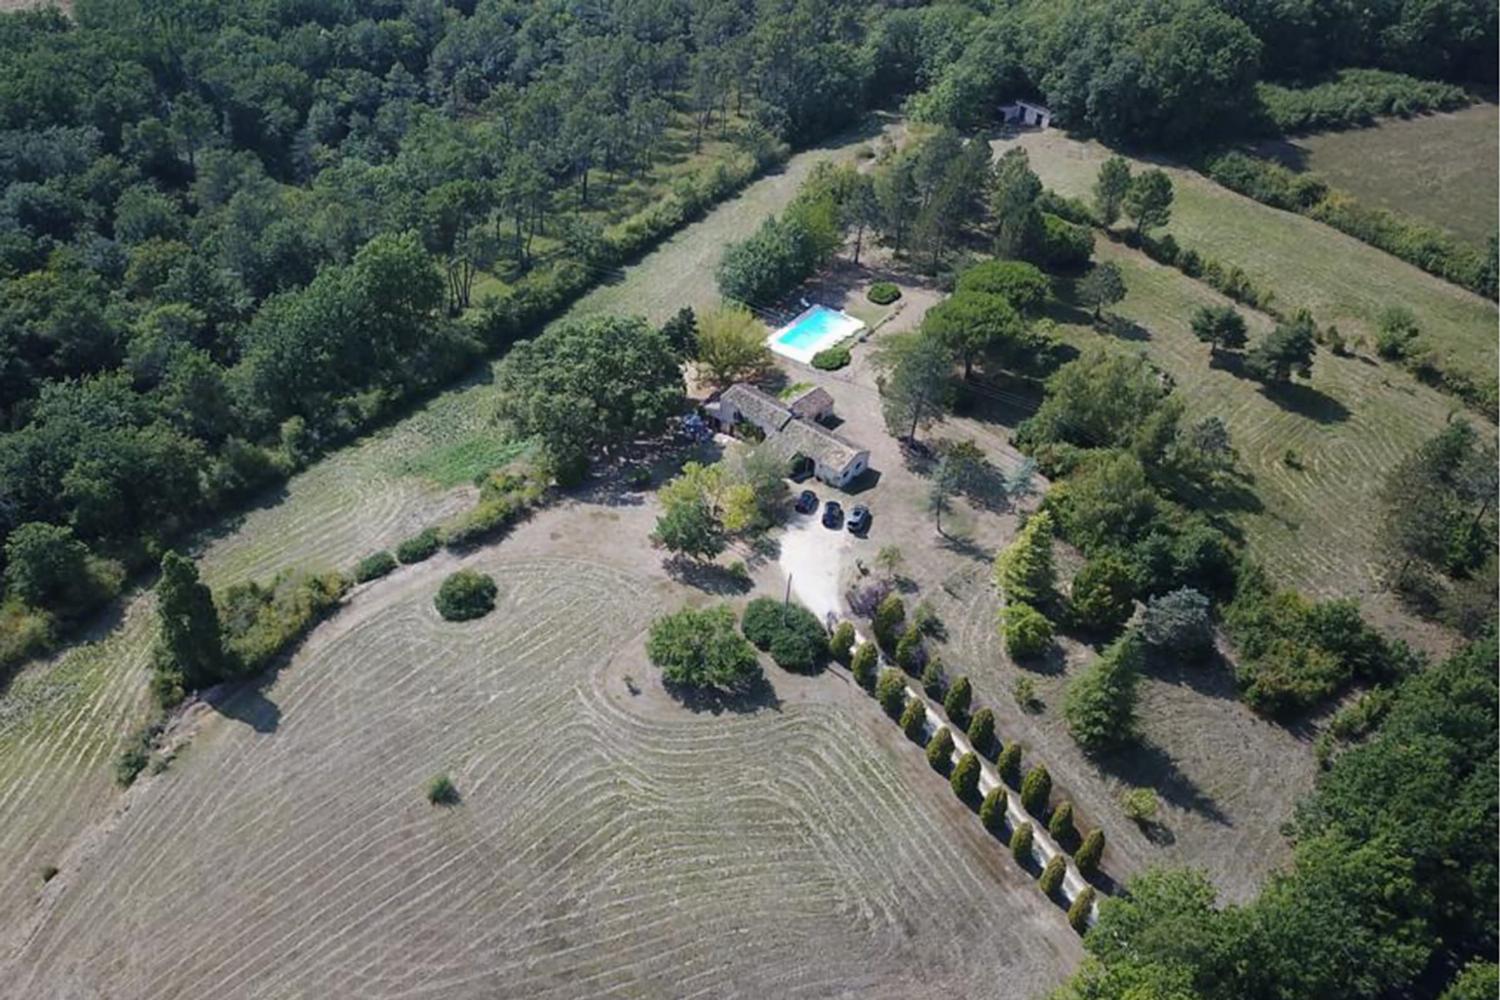 Rental accommodation in Dordogne with private pool